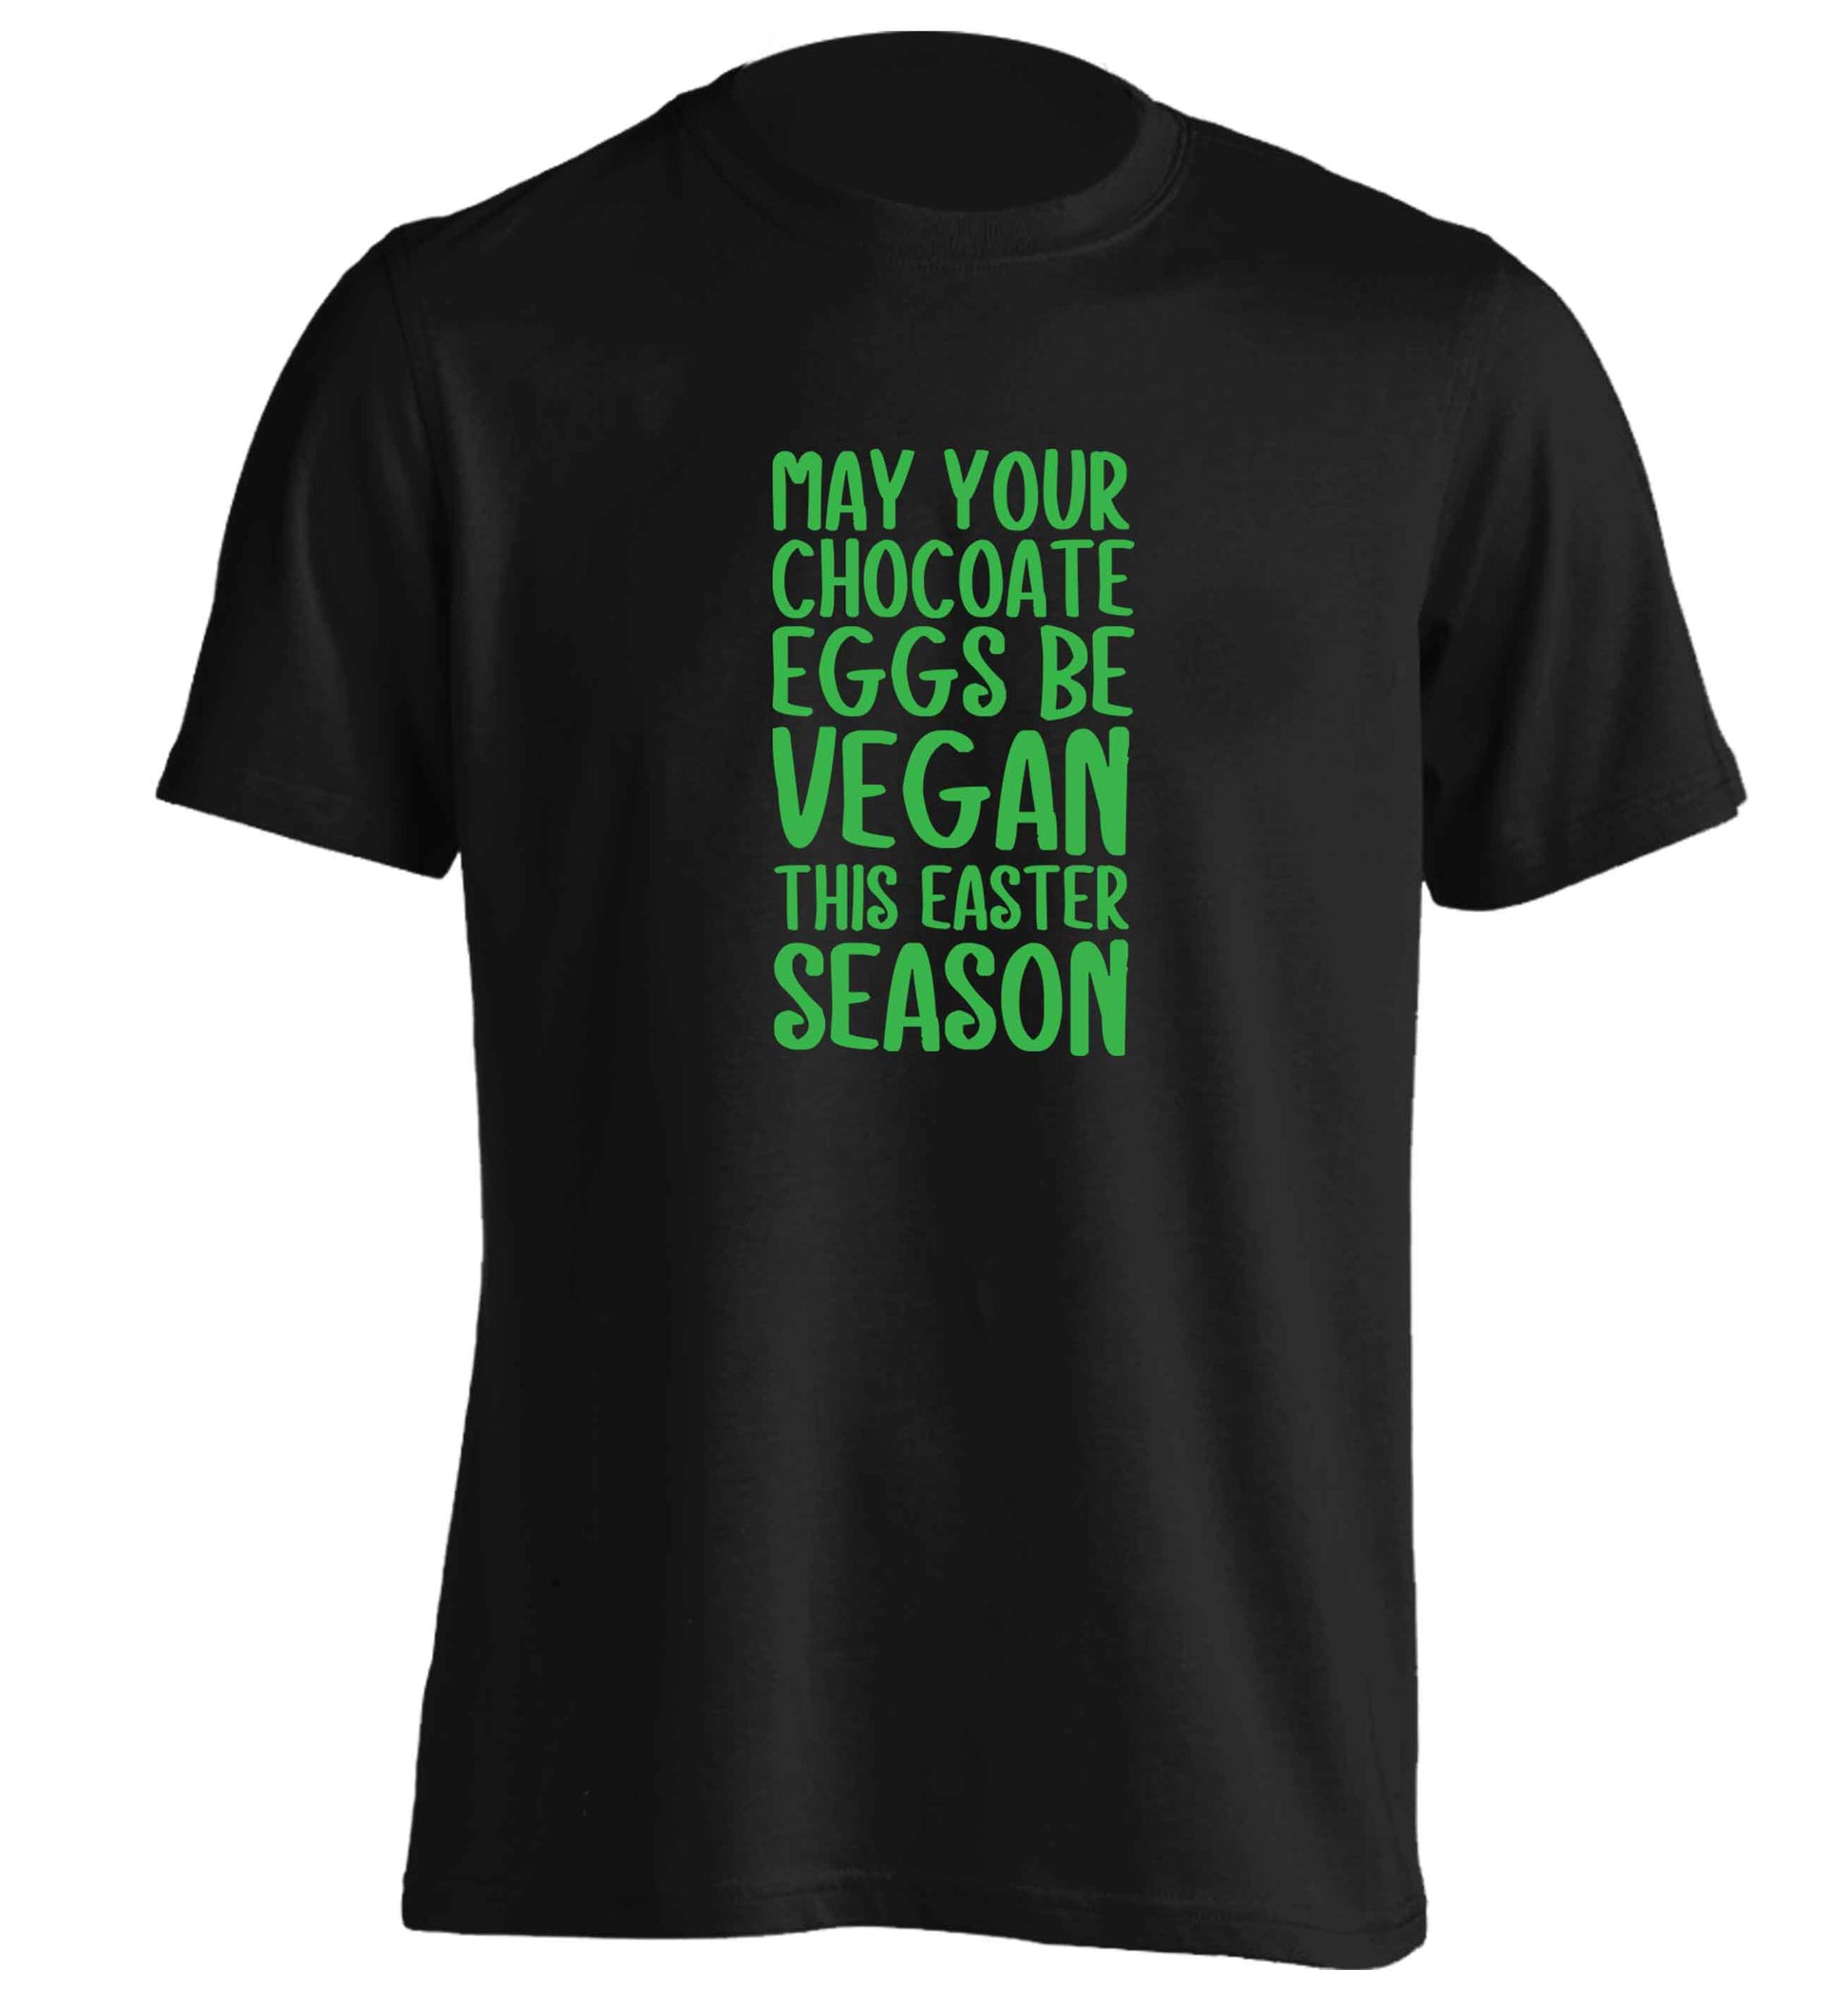 Easter bunny approved! Vegans will love this easter themed adults unisex black Tshirt 2XL